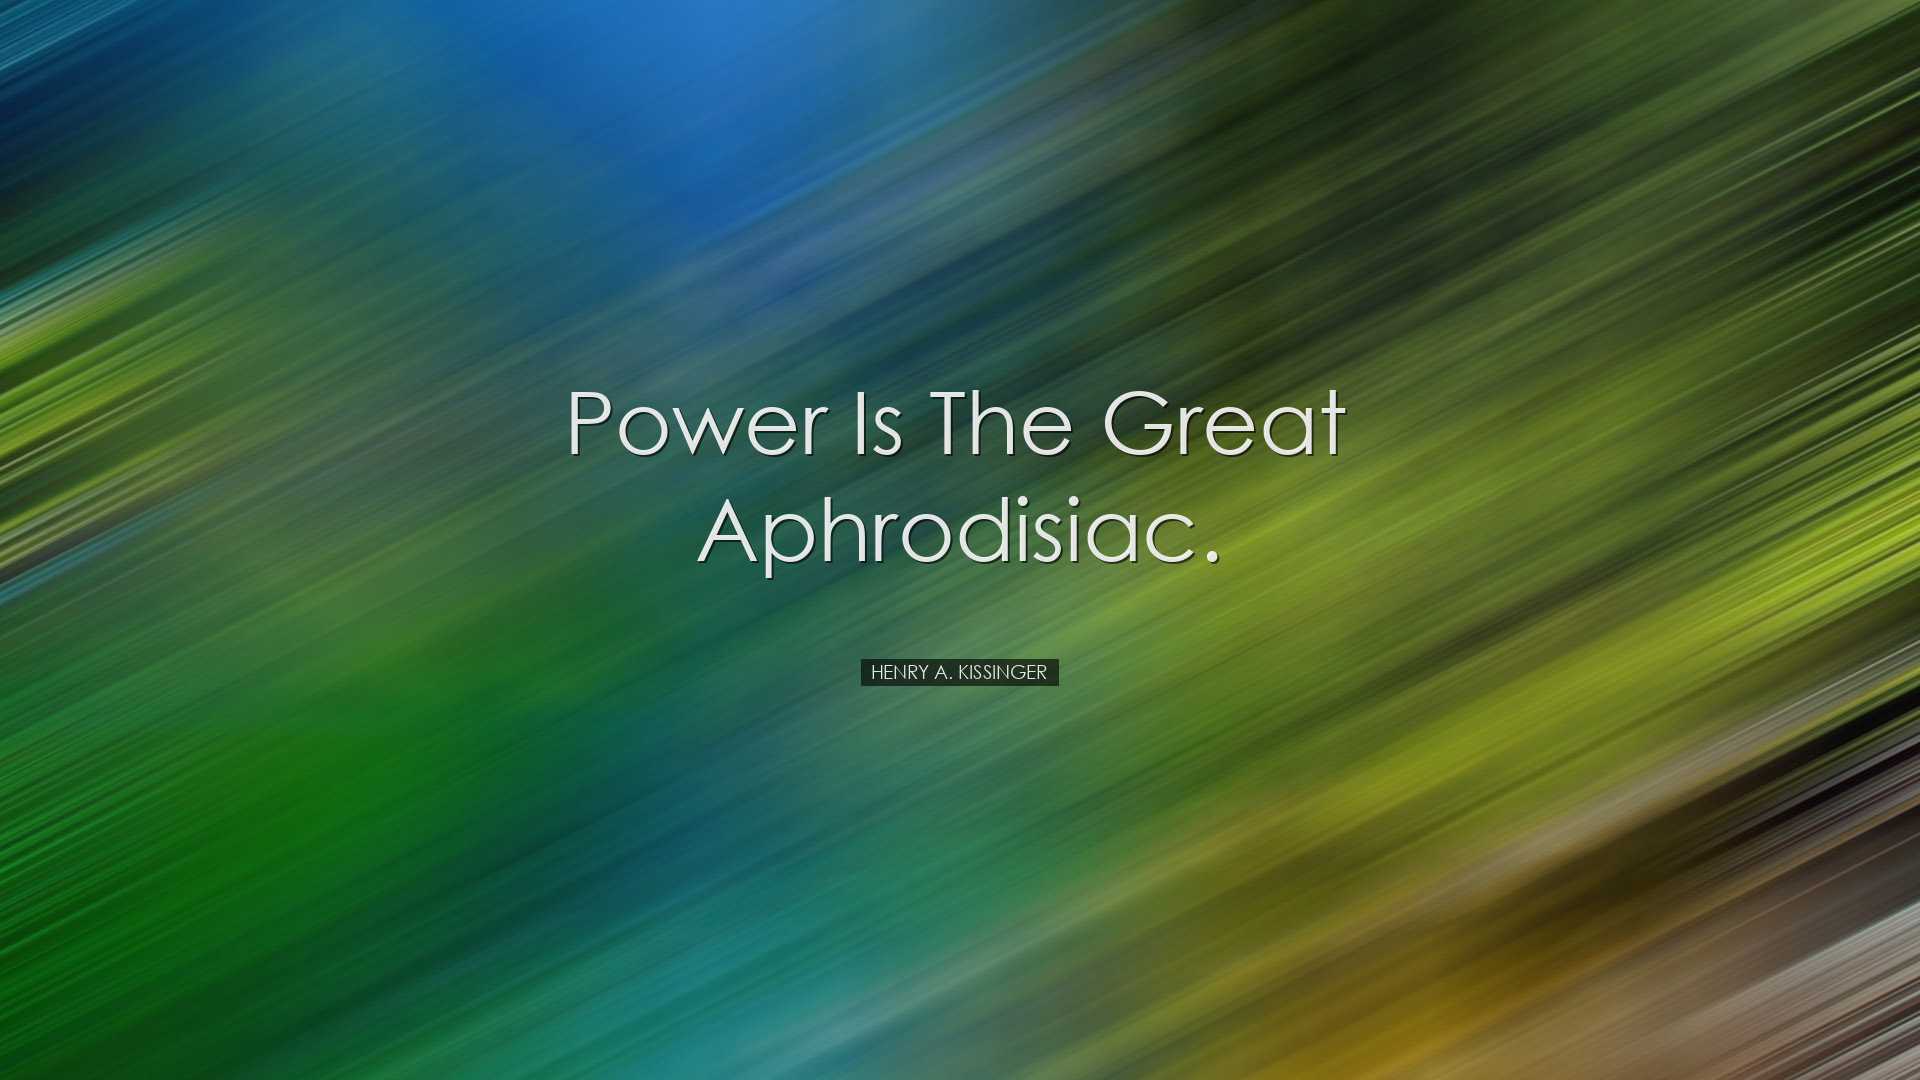 Power is the great aphrodisiac. - Henry A. Kissinger